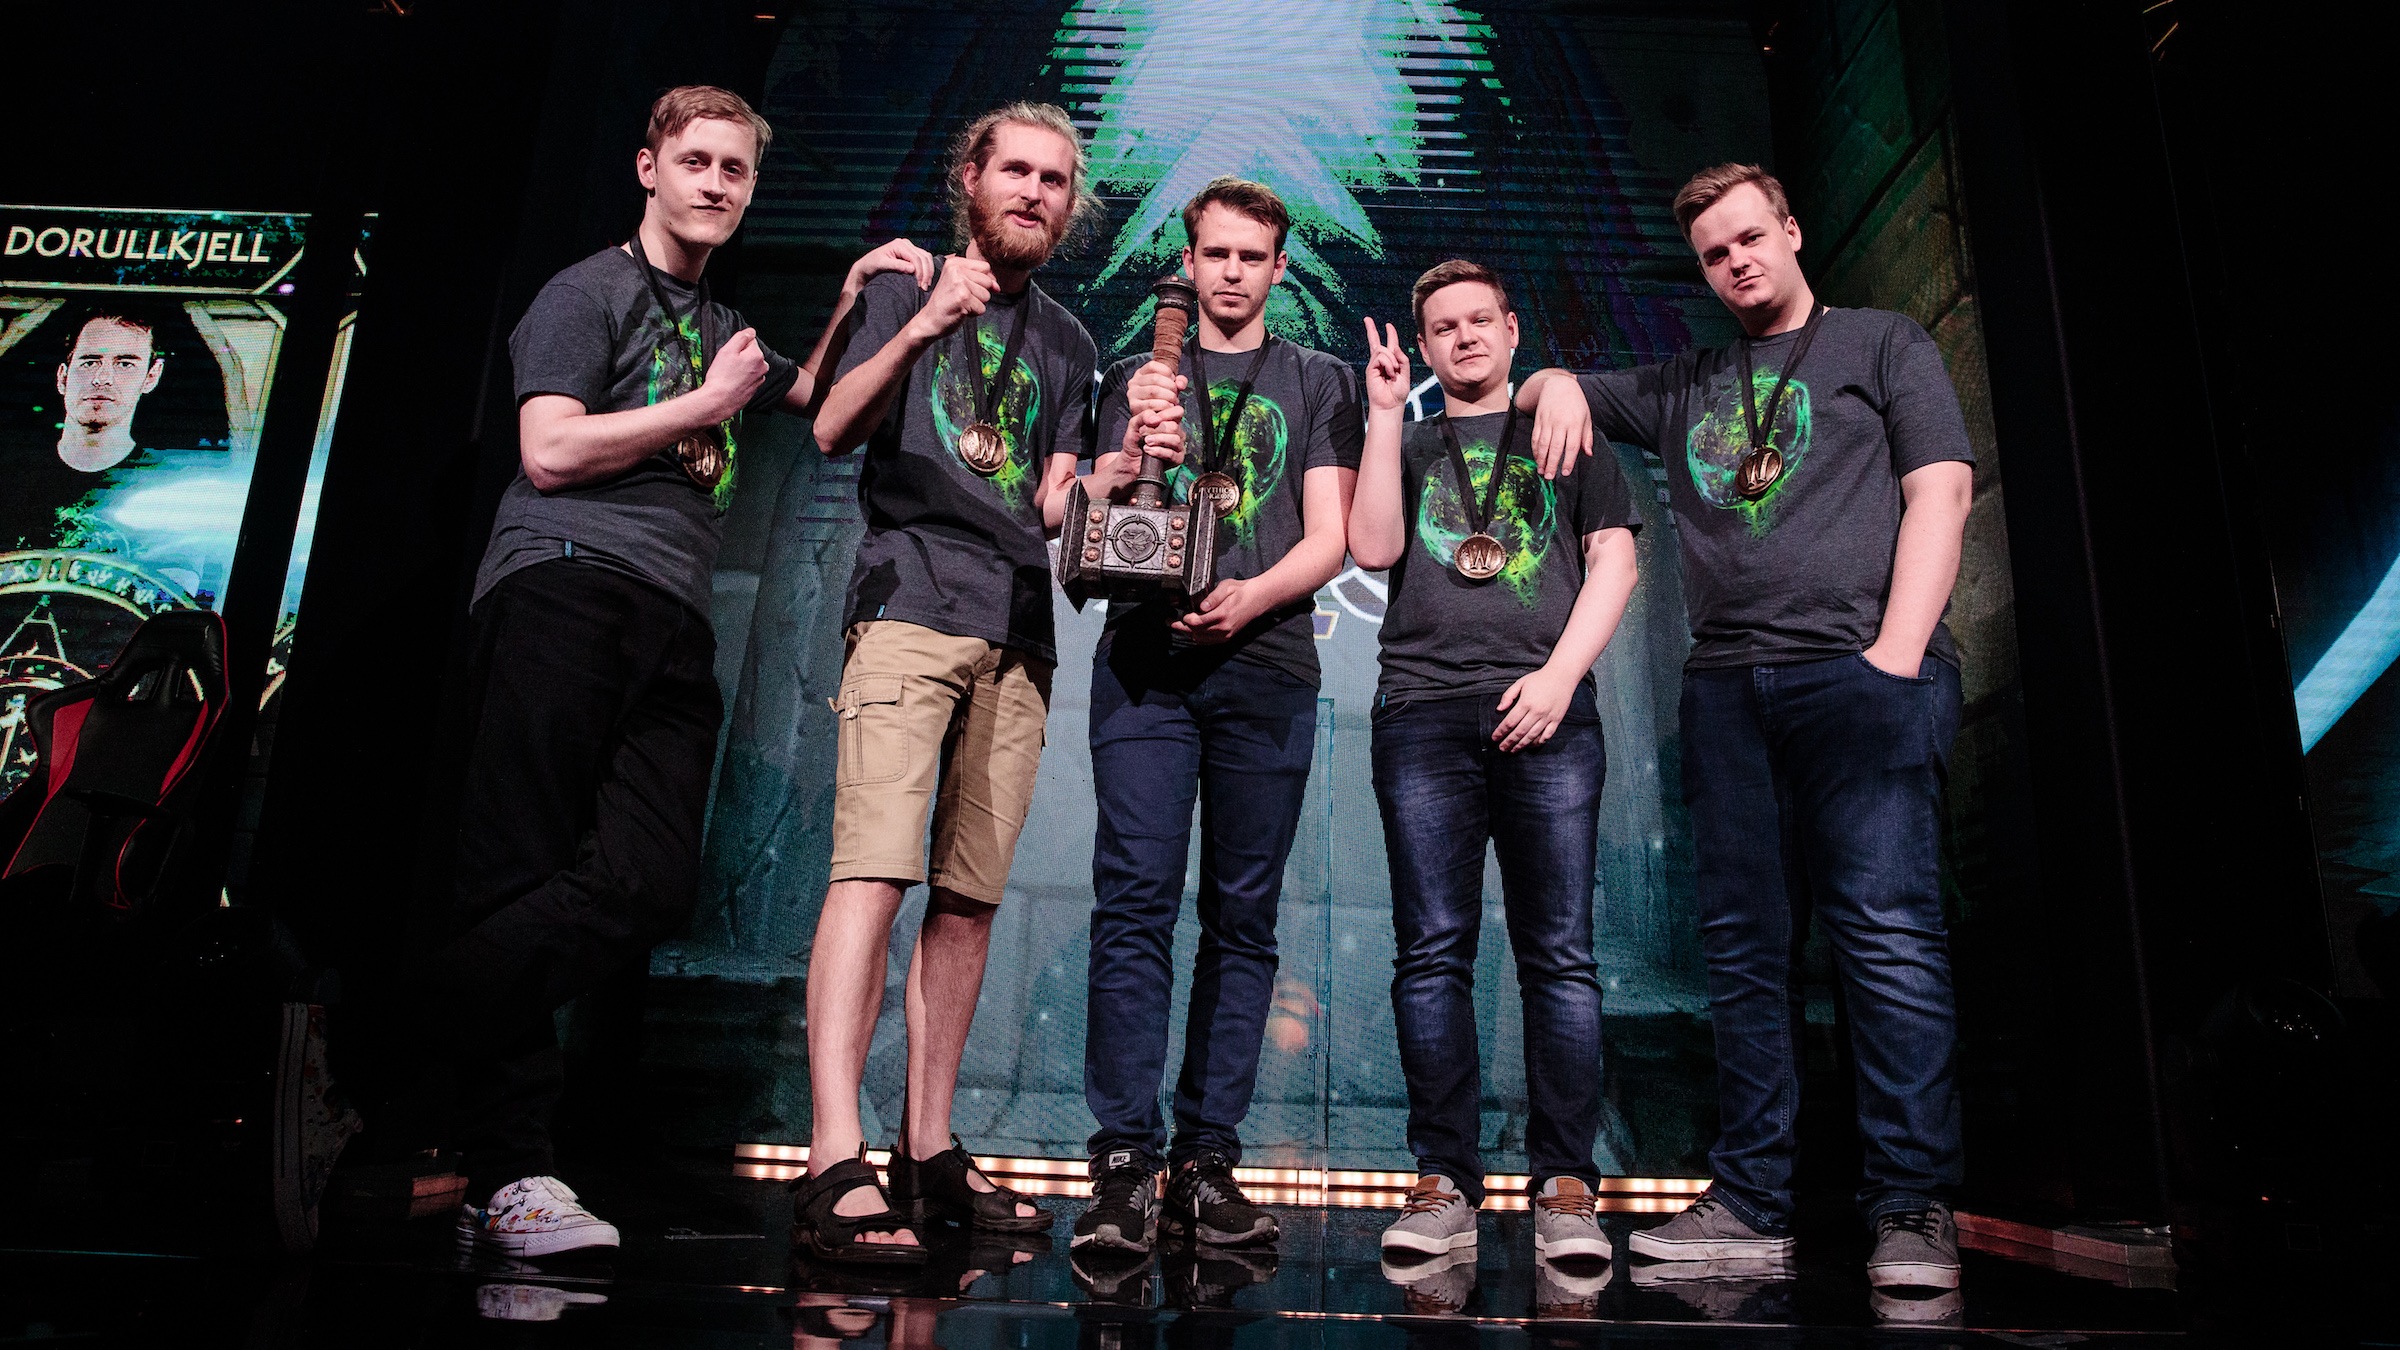 From Group Finder to Grand Champions: MDI Global Finals